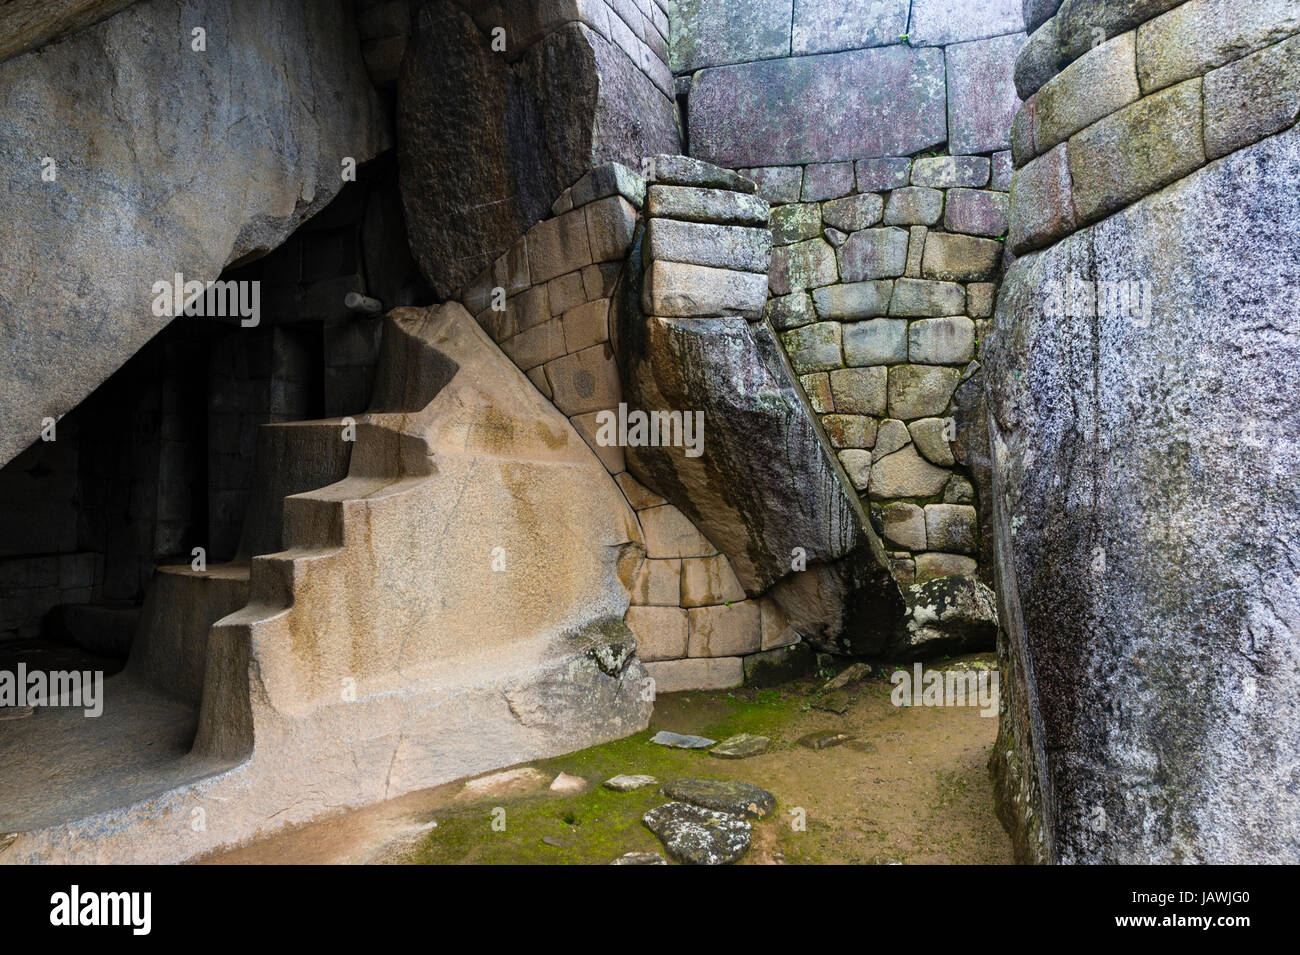 The Temple of the Condor features a carving of an Andean Condor and an alter in a natural cave. Stock Photo